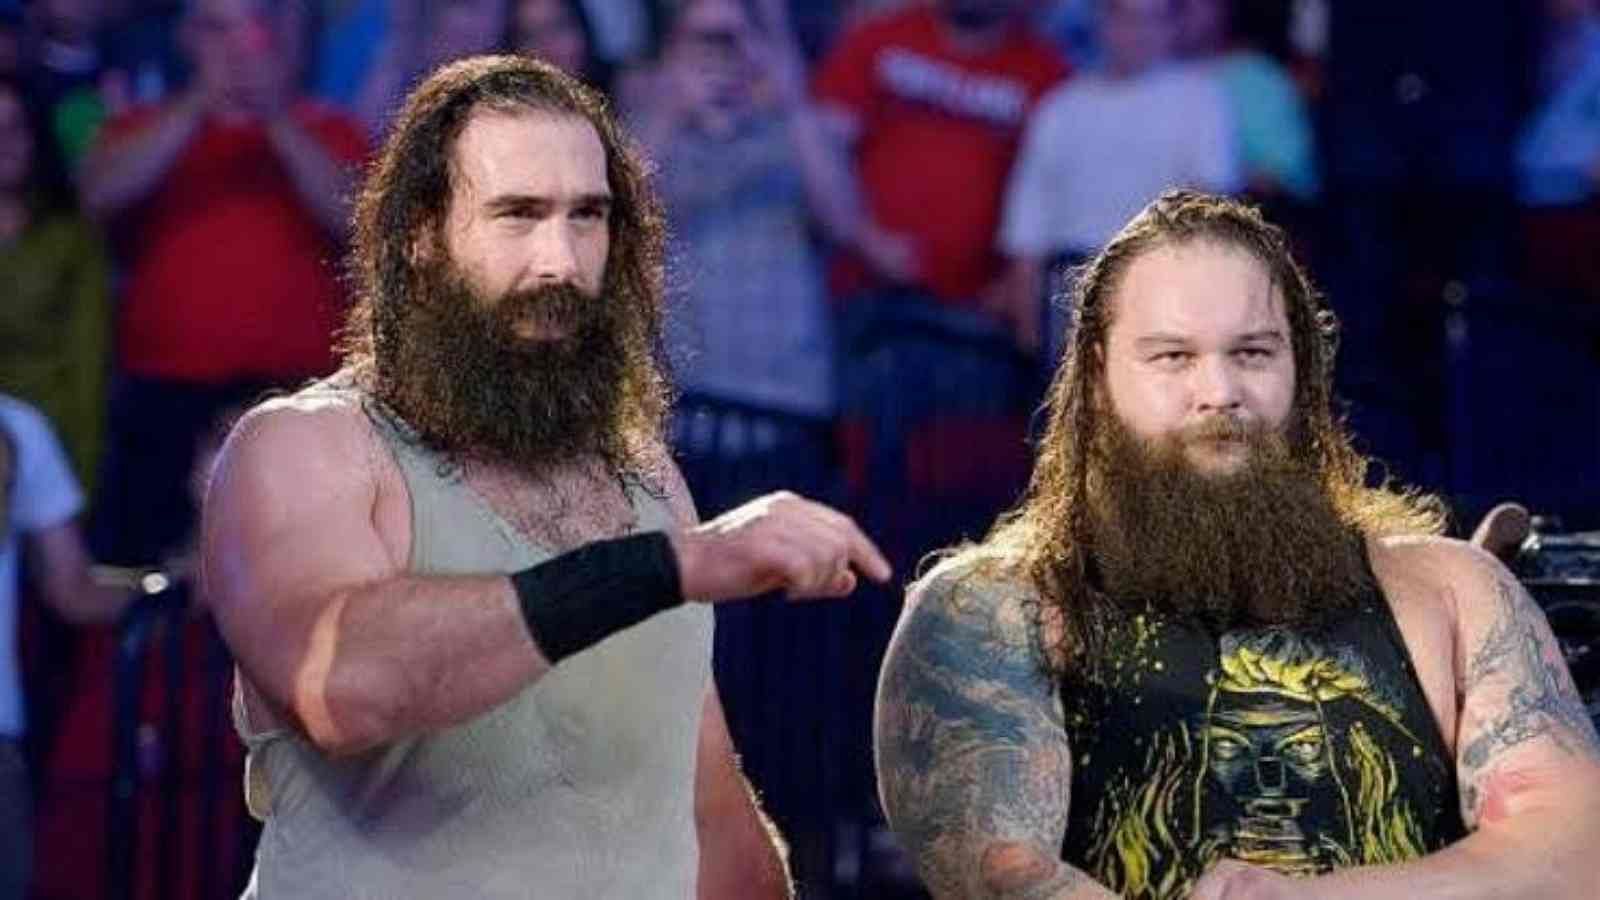 Bray Wyatt and Brodie Lee were a part of the Wyatt Family during their time with WWE